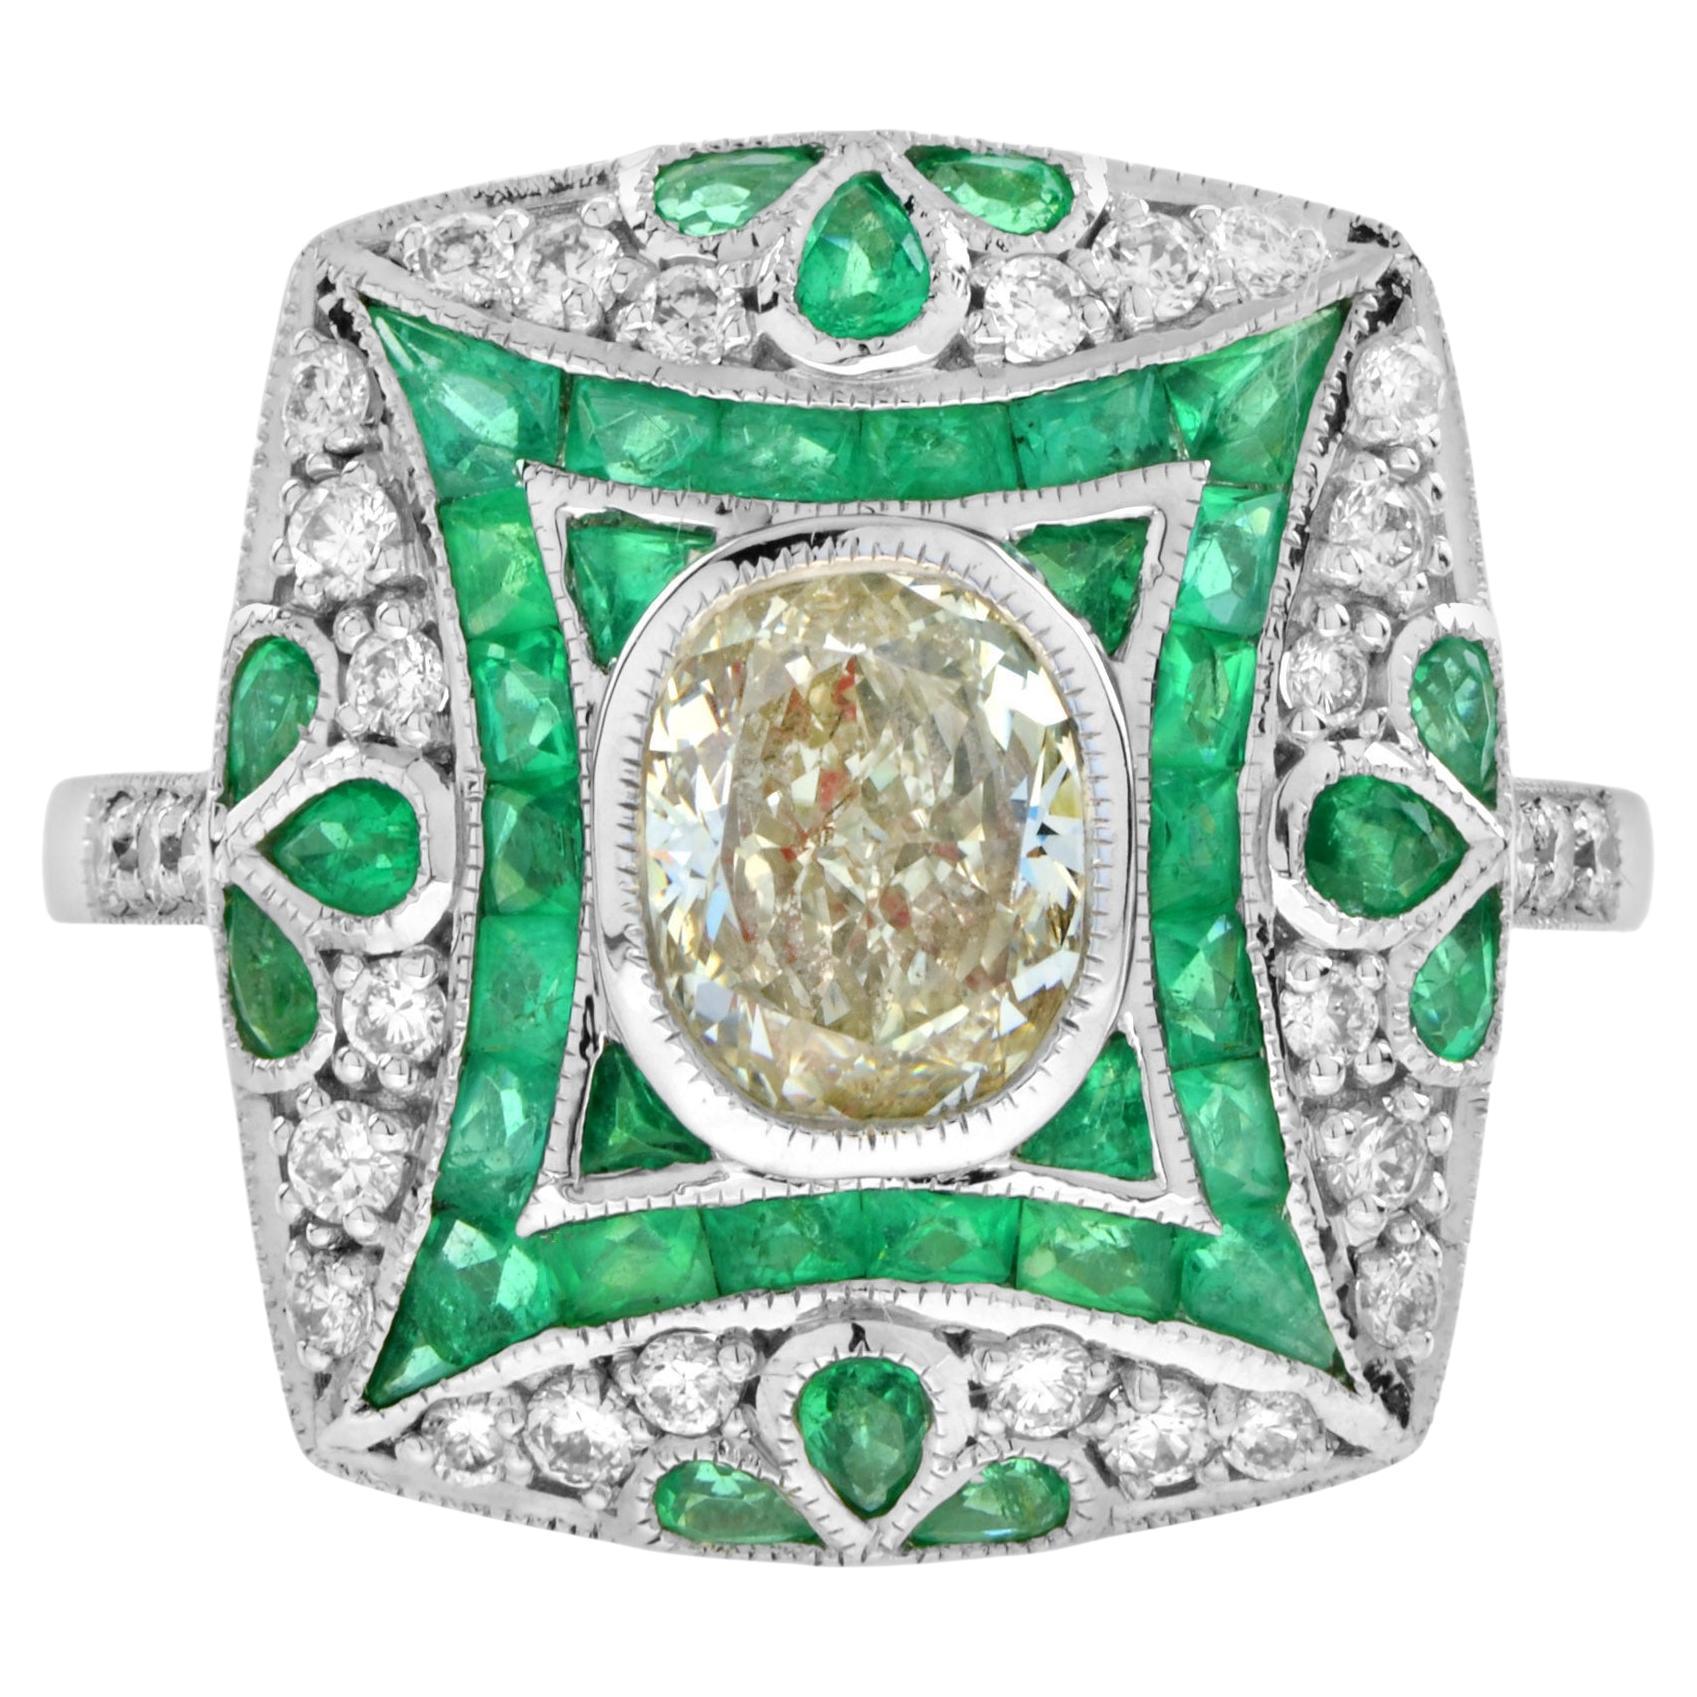 Certified Diamond and Emerald Art Deco Style Engagement Ring in 18k White Gold